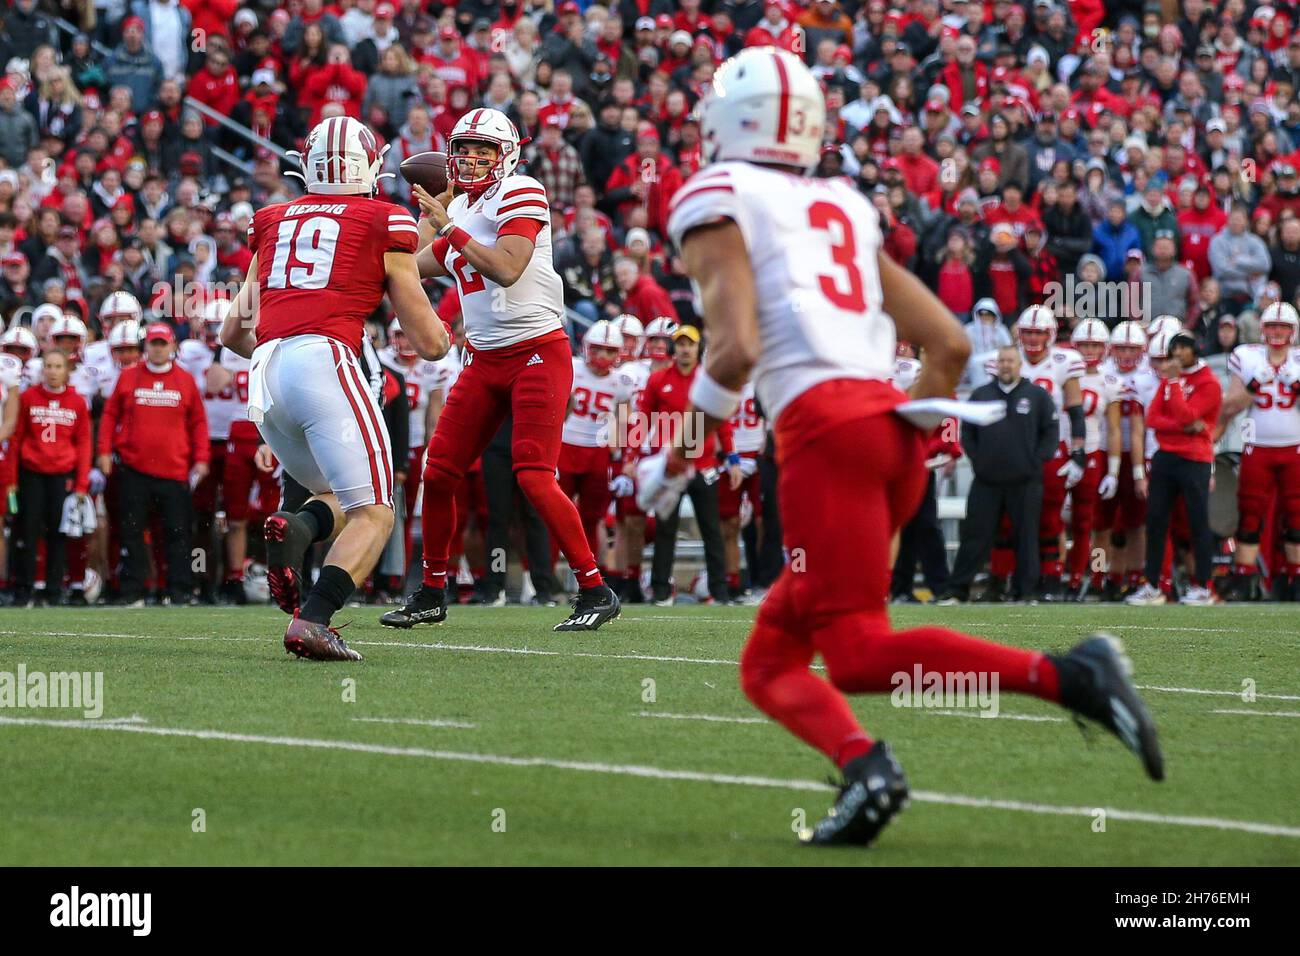 Madison, WI, USA. 20th Nov, 2021. Nebraska Cornhuskers quarterback Adrian Martinez (2) passing a 4 yard touchdown to wide receiver Samori Toure (3) during the NCAA Football game between the Nebraska Cornhuskers and the Wisconsin Badgers at Camp Randall Stadium in Madison, WI. Darren Lee/CSM/Alamy Live News Stock Photo